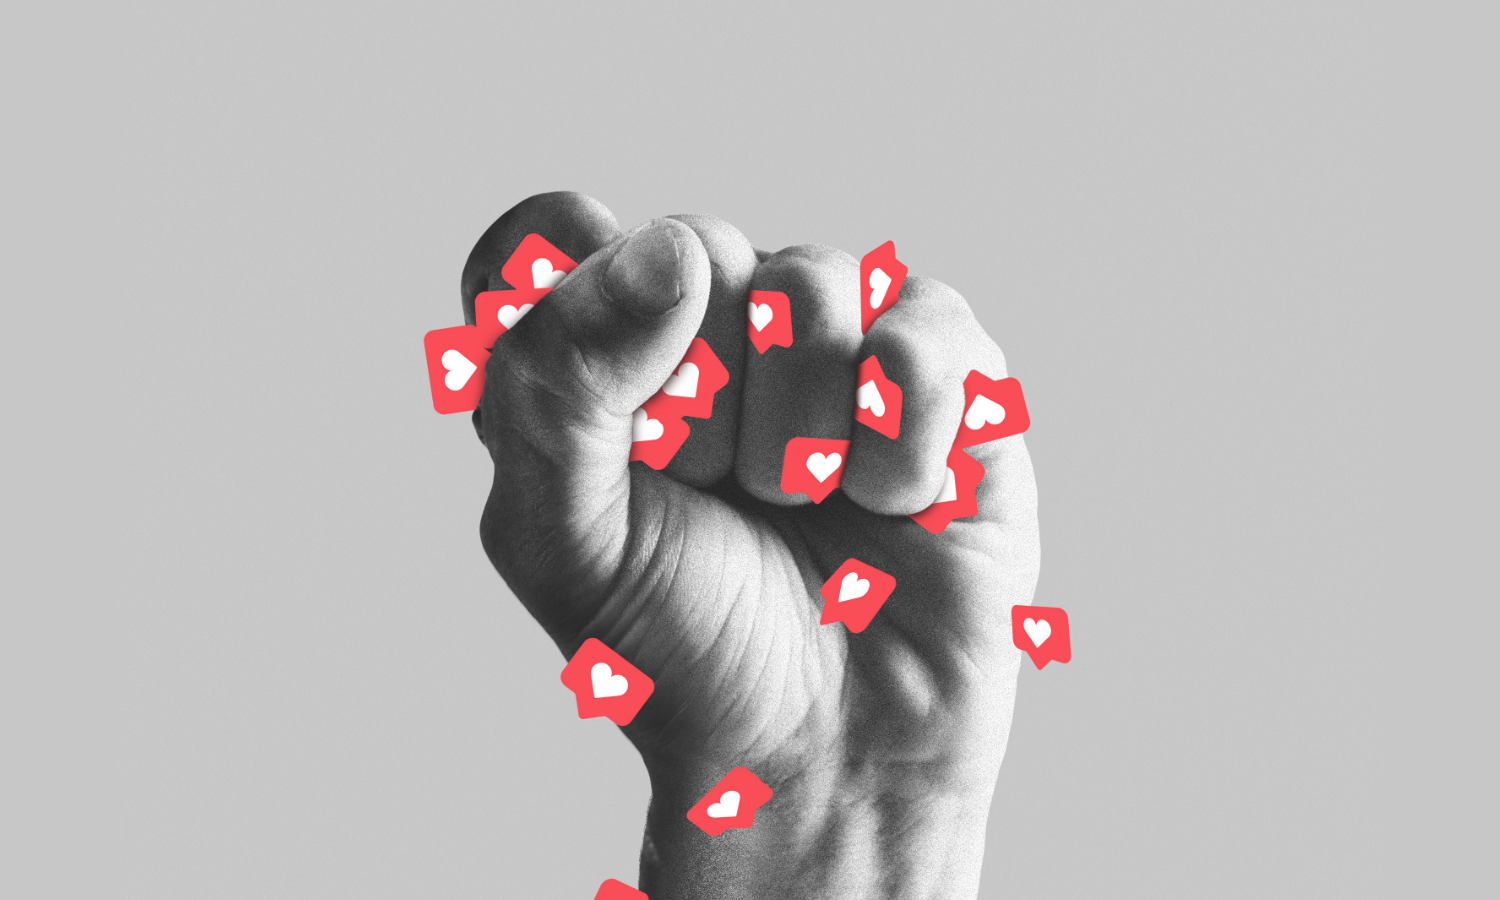 Fist holding multiple social media notification boxes with hearts